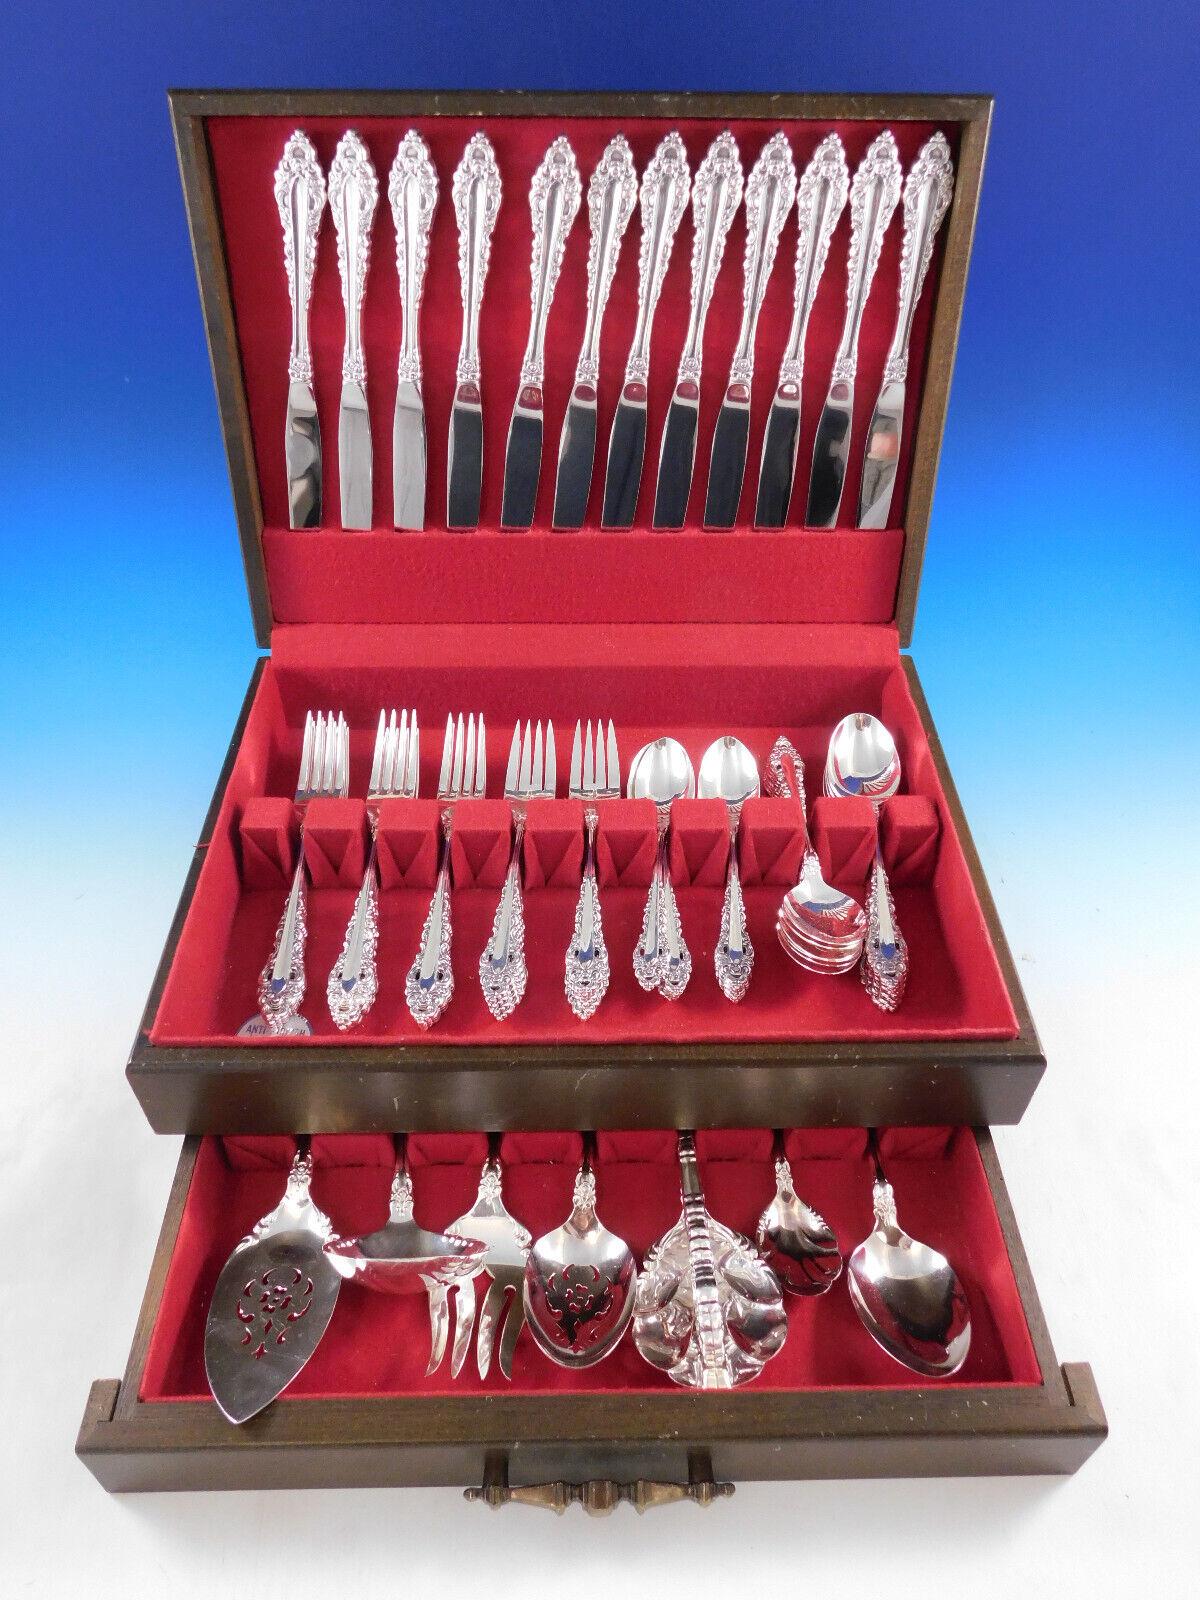 Royal Grandeur by Community Oneida Stainless Steel Flatware set, 68 pieces. This set includes:

12 Dinner Knives, 9 1/2